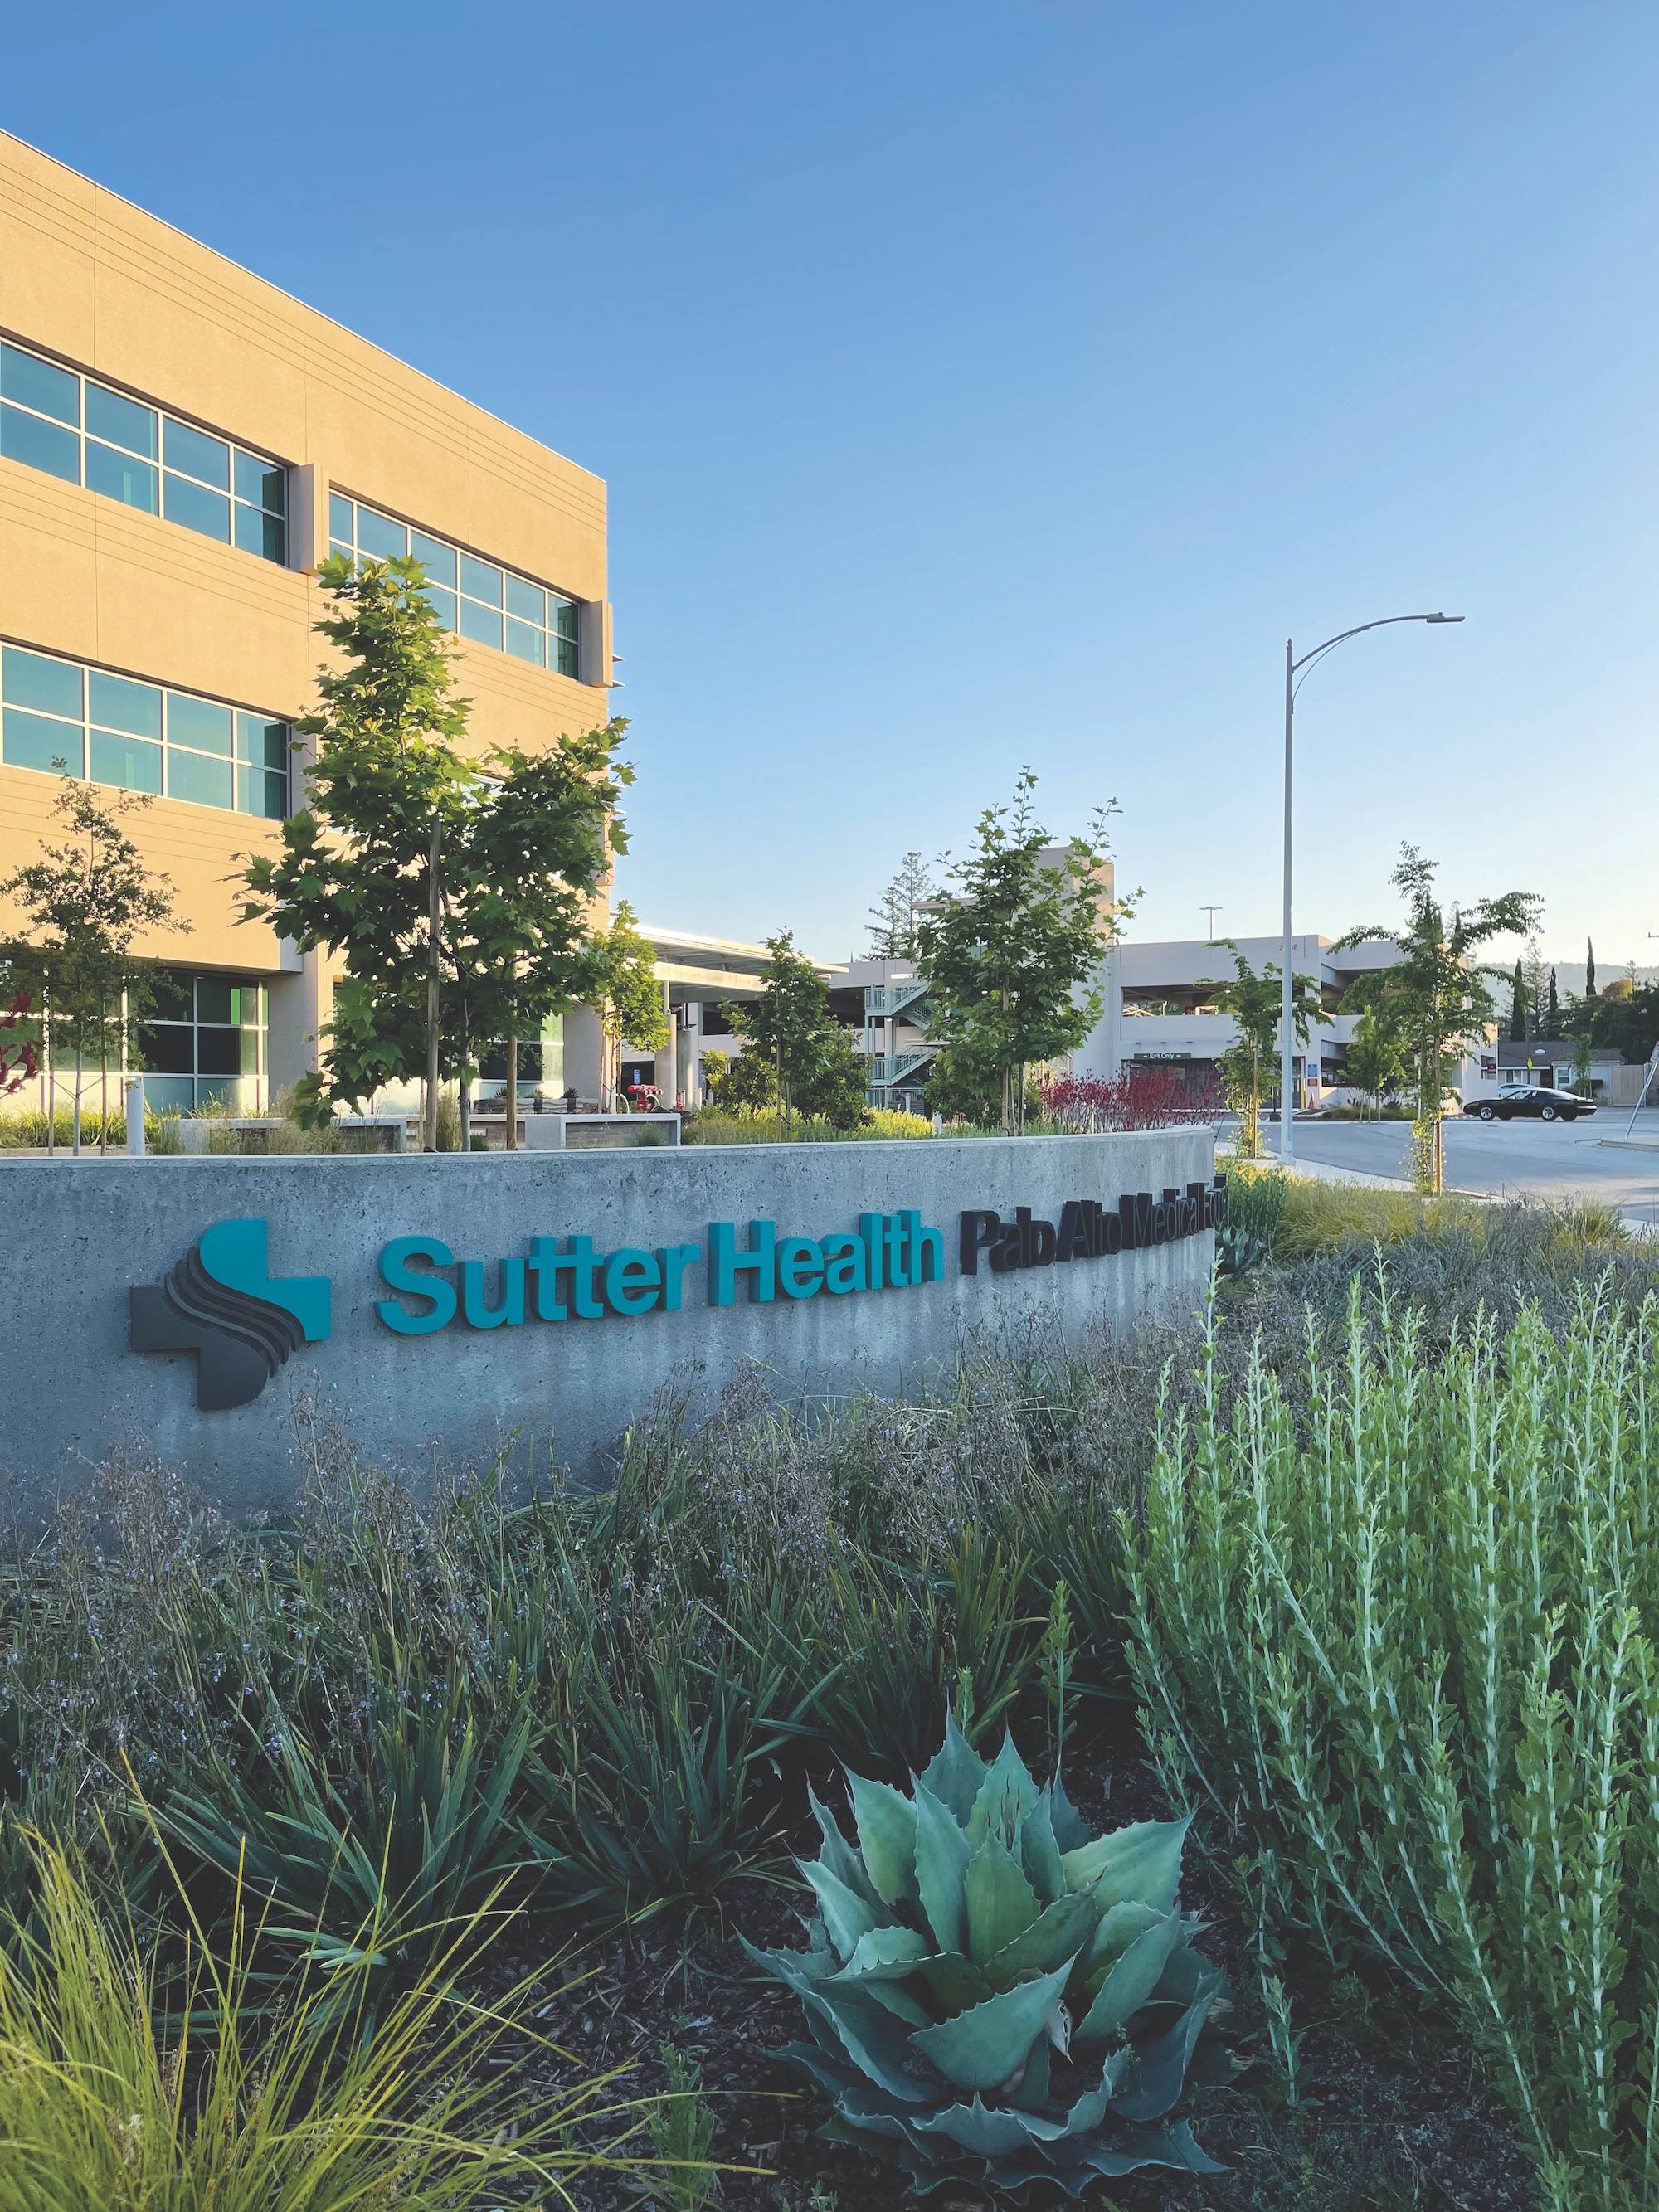 Sutter Health’s new Samaritan Court Ambulatory Care and Surgery Center finishes three months early, $3 million under budget